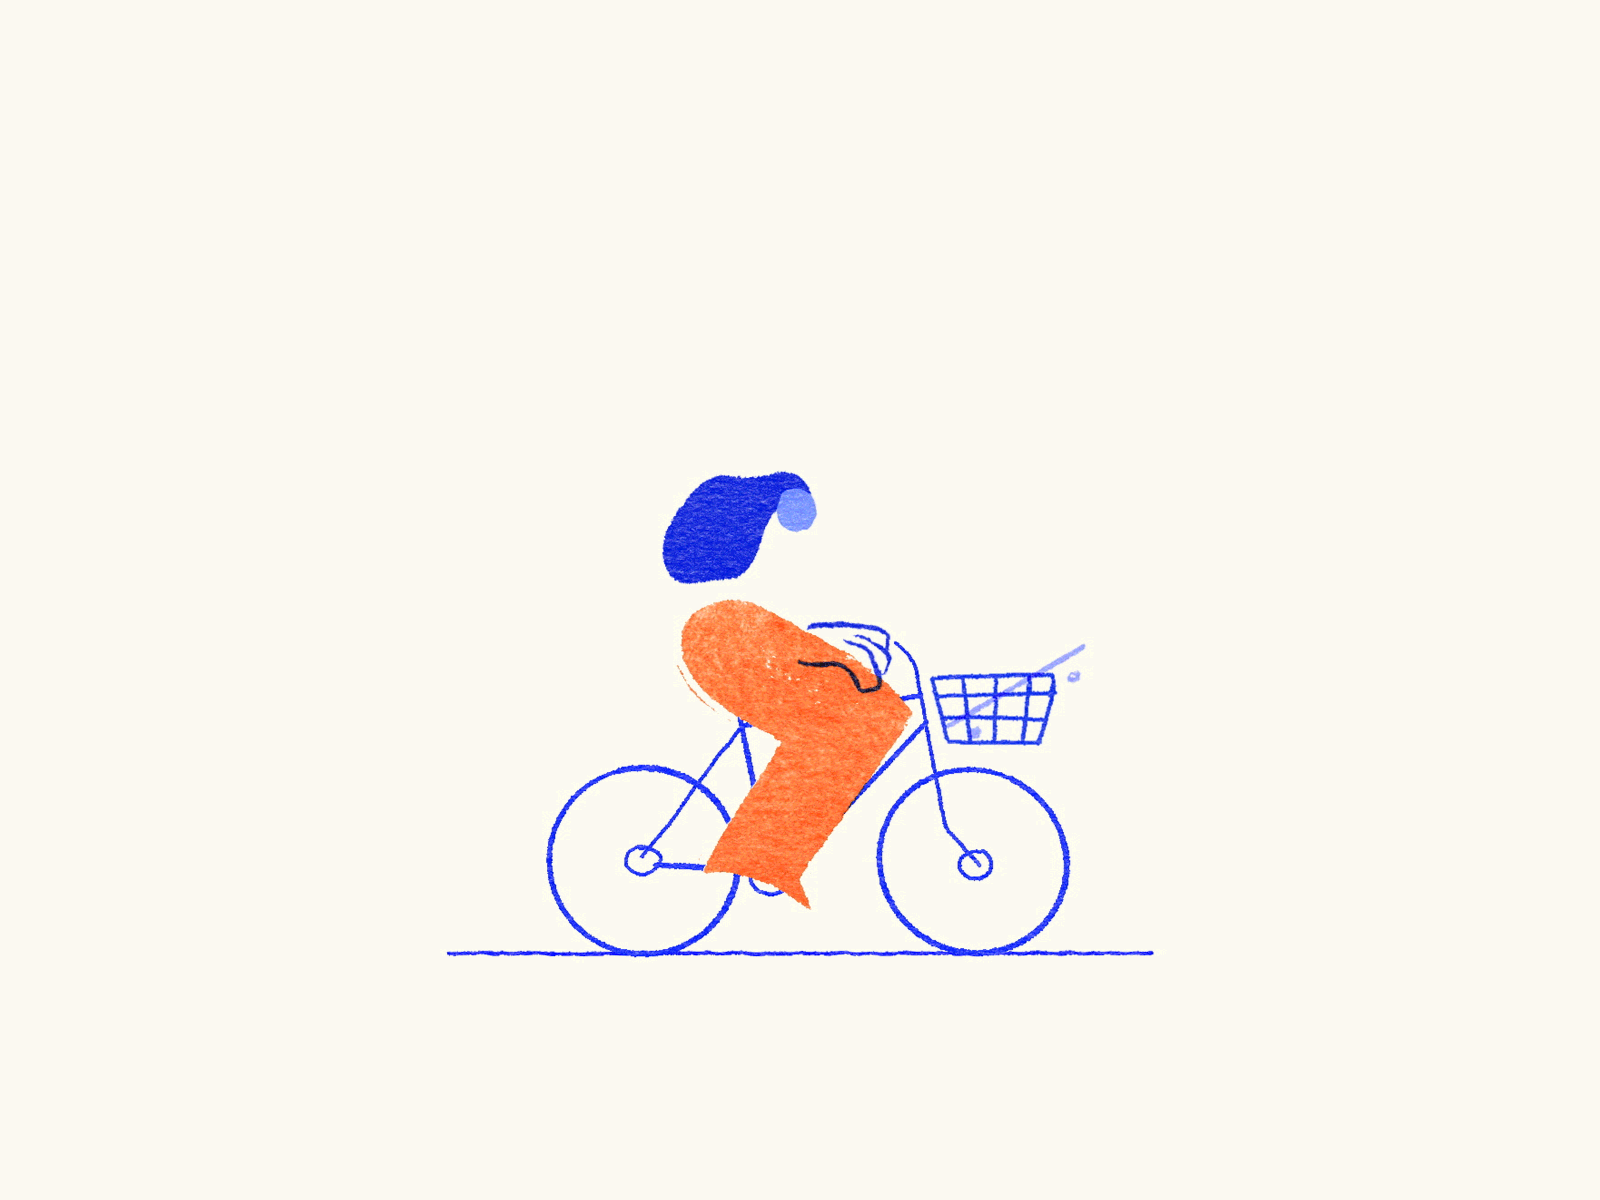 The Biker animated gif animation bicycle bike cycling drawing frame by frame gif hand drawn illustration motion graphics sketch